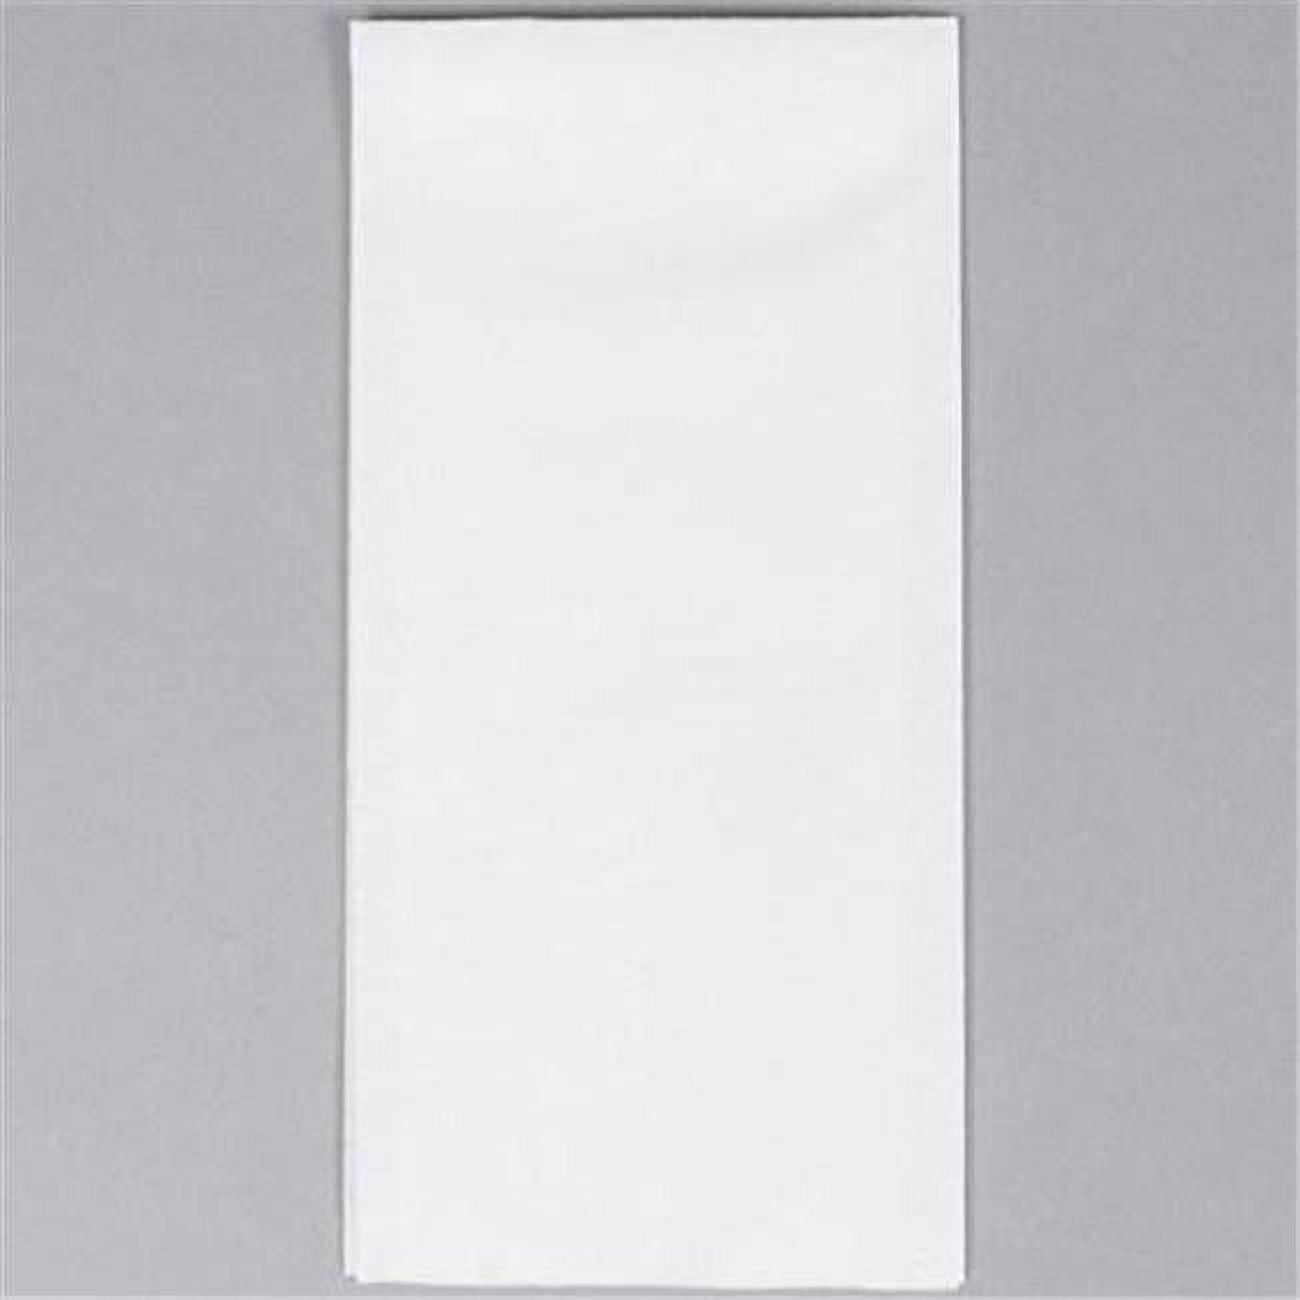 856499 Cpc 12 X 17 In. Linen-like Guest Towel - White, Case Of 500